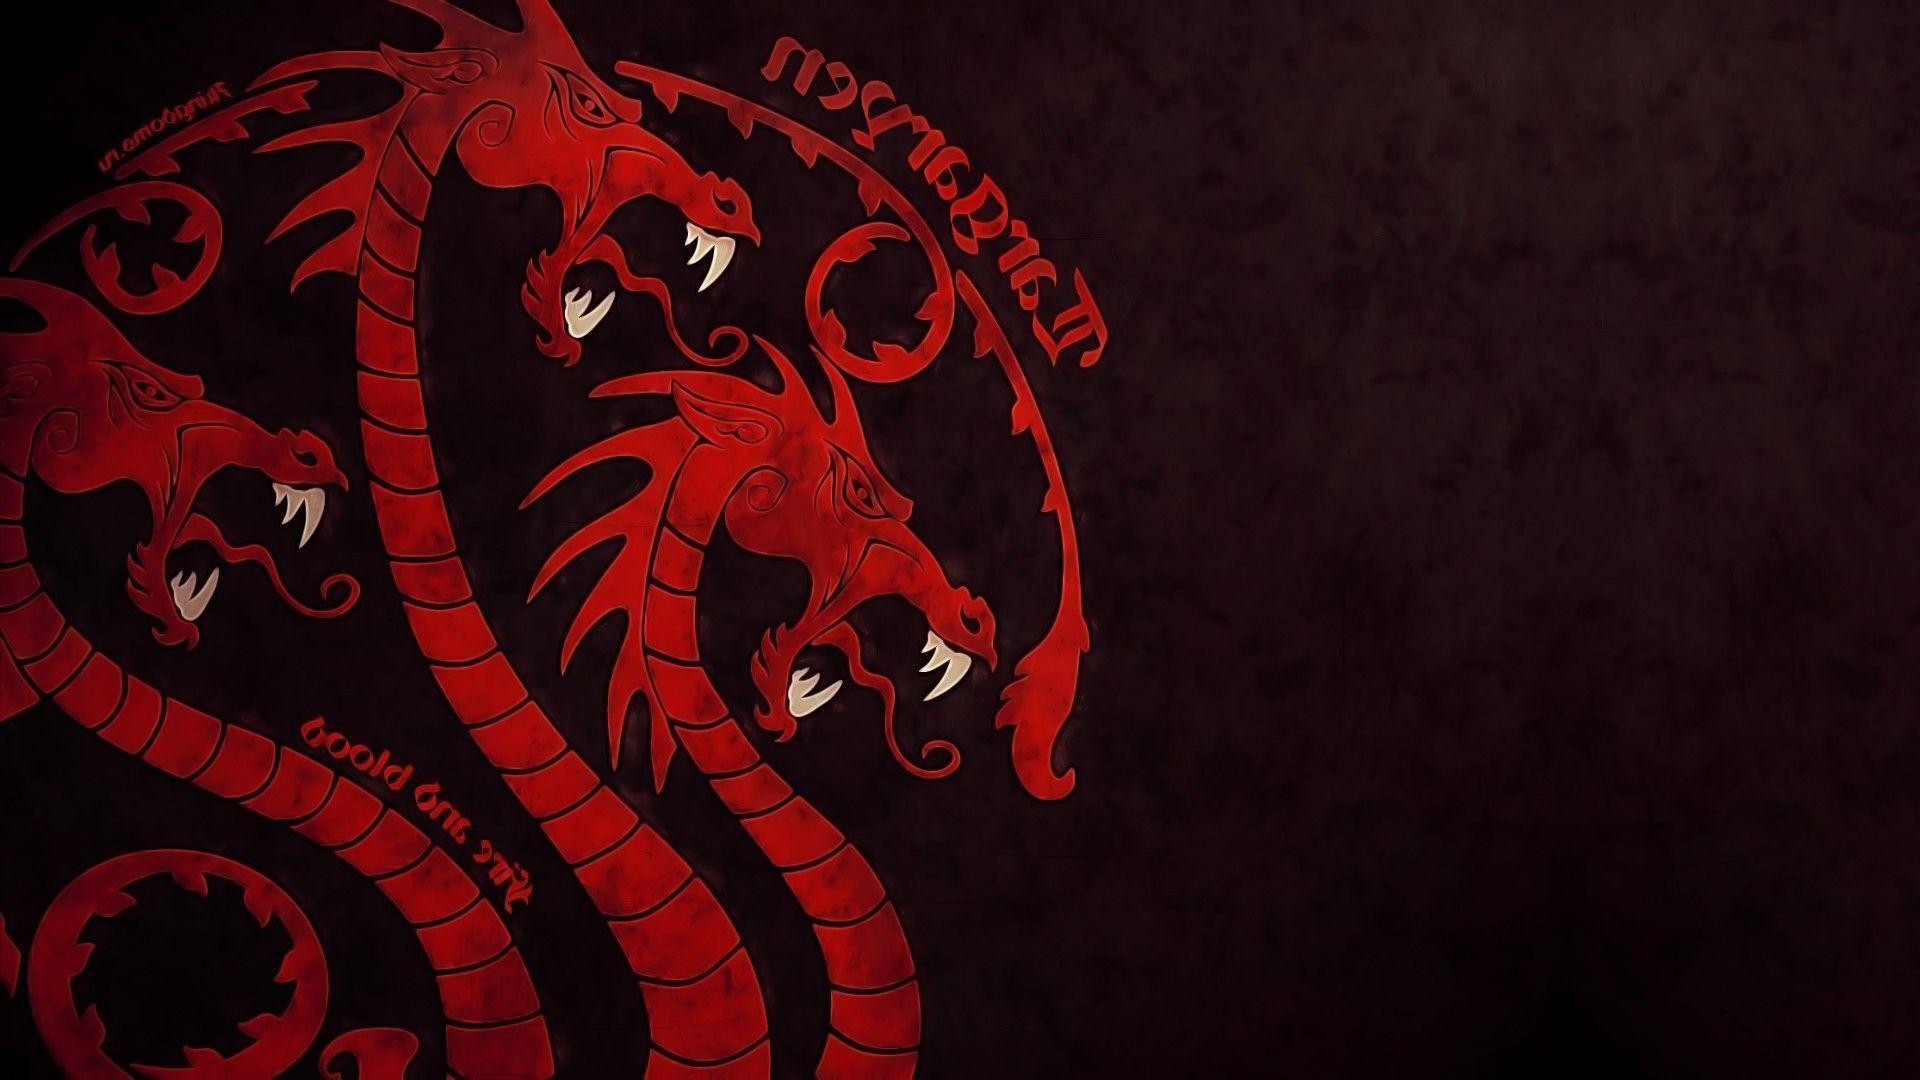 House Targaryen Game of Thrones Poster Wallpaper with high-resolution 1920x1080 pixel. You can use this poster wallpaper for your Desktop Computers, Mac Screensavers, Windows Backgrounds, iPhone Wallpapers, Tablet or Android Lock screen and another Mobile device